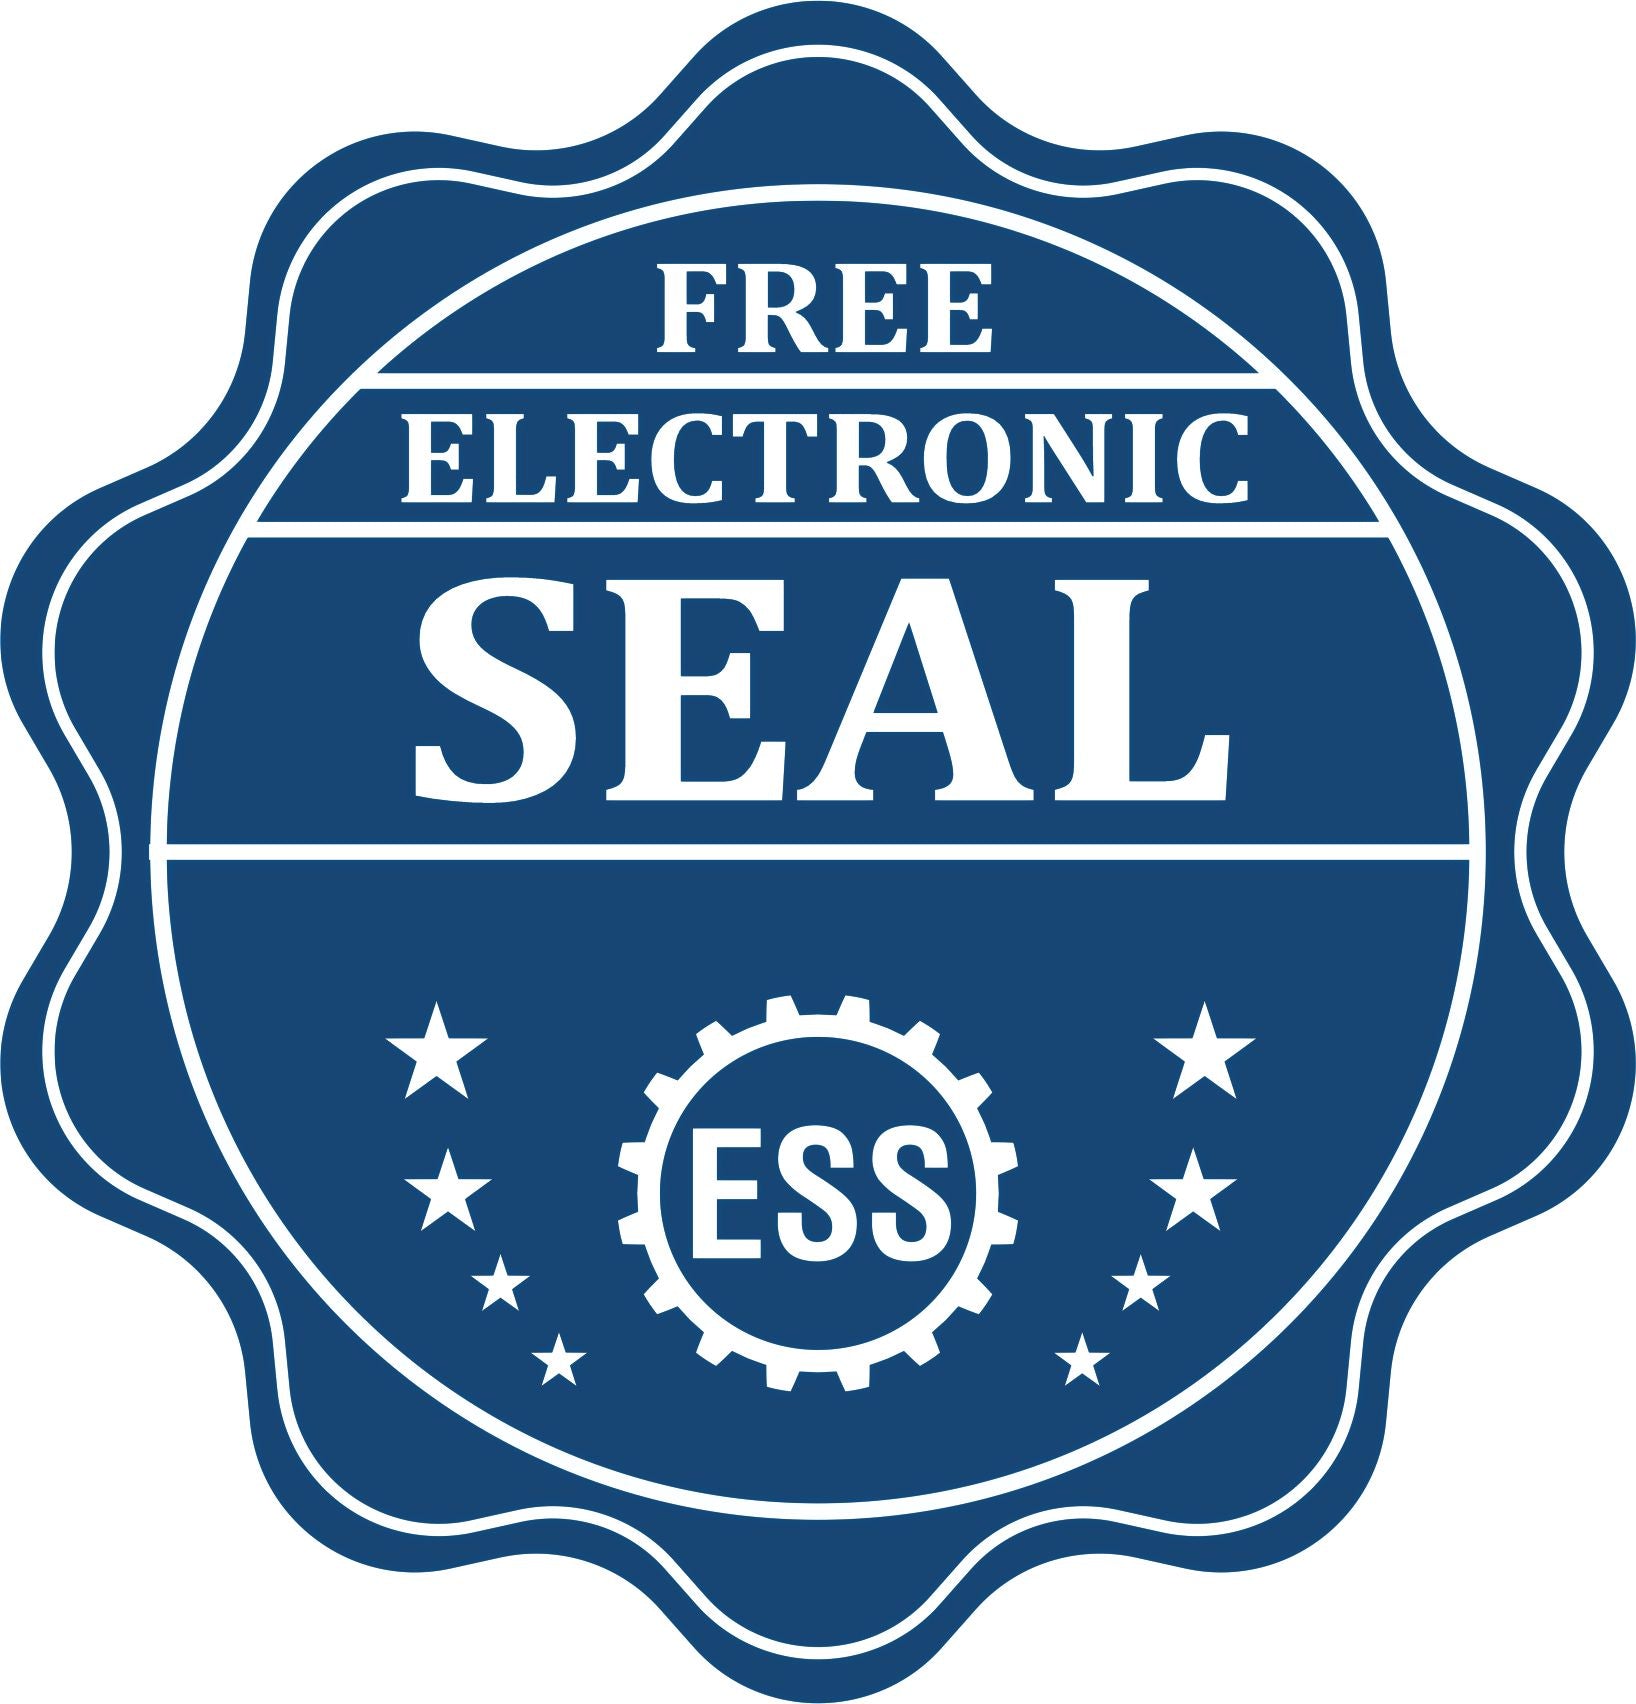 A badge showing a free electronic seal for the Hybrid New Jersey Engineer Seal with stars and the ESS gear on the emblem.